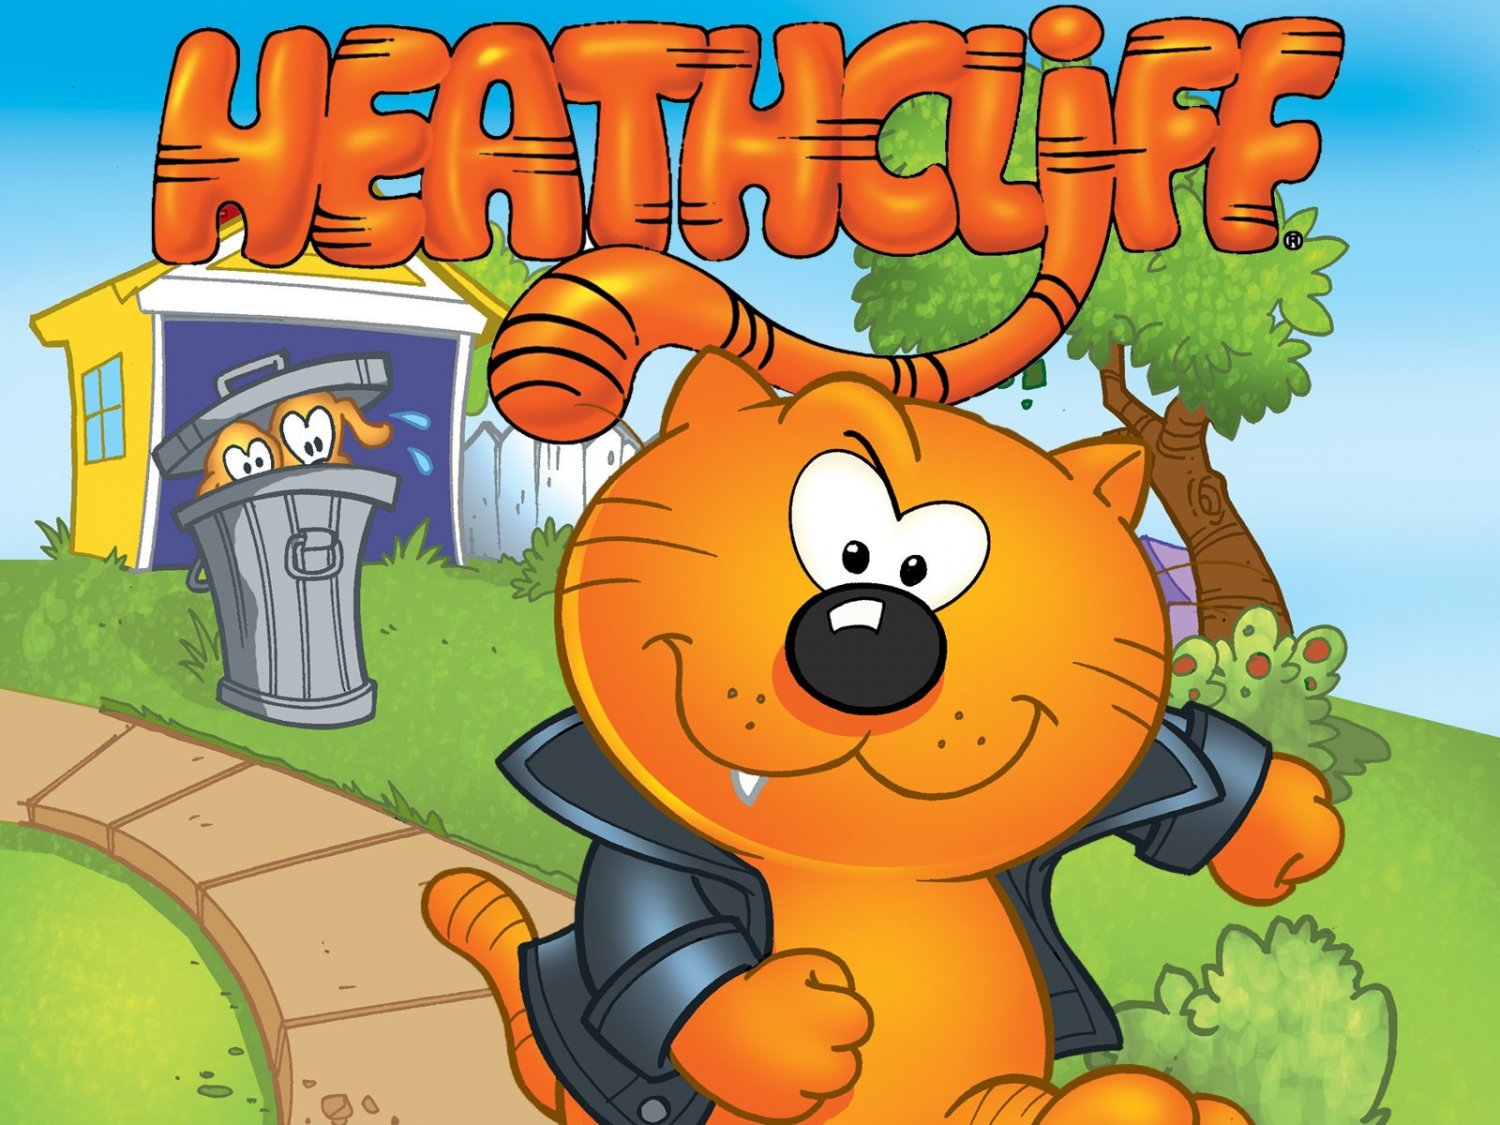 Heath cliff and the Catallic Cats Complete Series